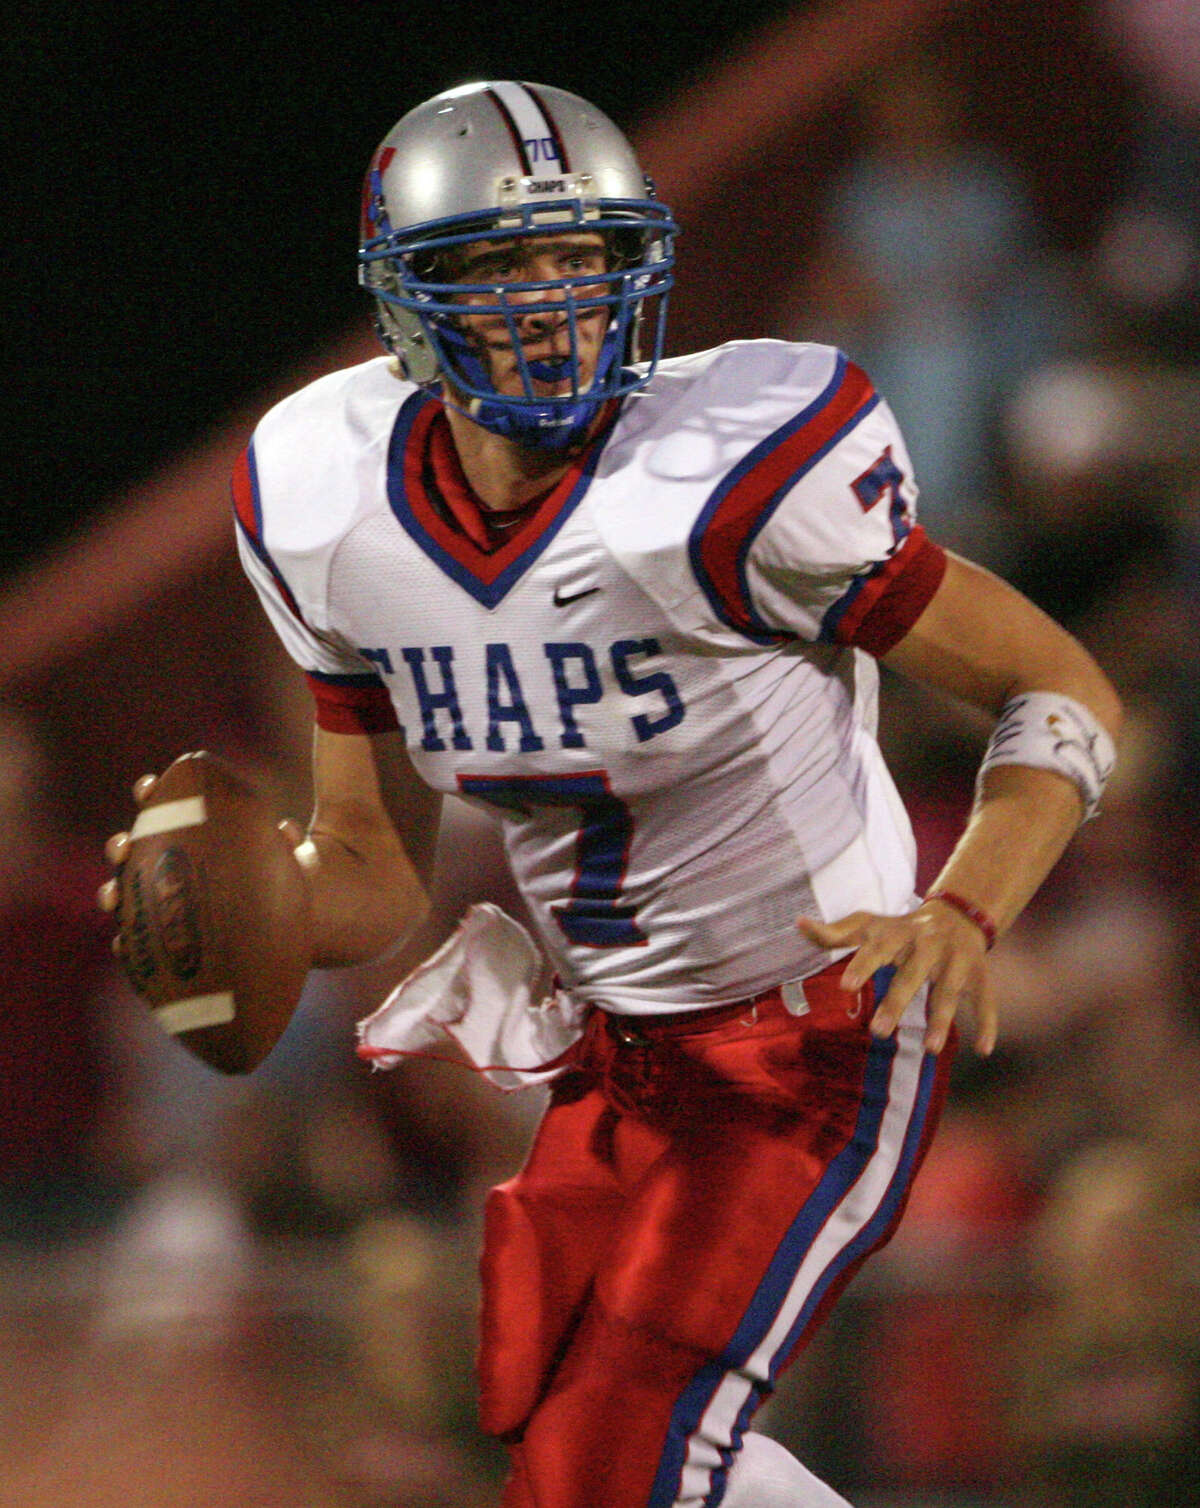 FILE - In this Sept. 29, 2006 file photo, Westlake High School quarterback Nick Foles looks for a receiver against Austin High during a football game in Austin, Texas. Ten years after Drew Brees led Westlake High School to victory in the Texas state championship game, Foles broke several of his passing records but lost in the title game. The two quarterbacks meet with far more at stake _ Saints vs. Eagles in an NFC wild-card game. (AP Photo/Austin American Statesman, Jay Janner, File) AUSTIN CHRONICLE OUT, COMMUNITY IMPACT OUT, INTERNET MUST CREDIT PHOTOGRAPHER AND STATESMAN.COM